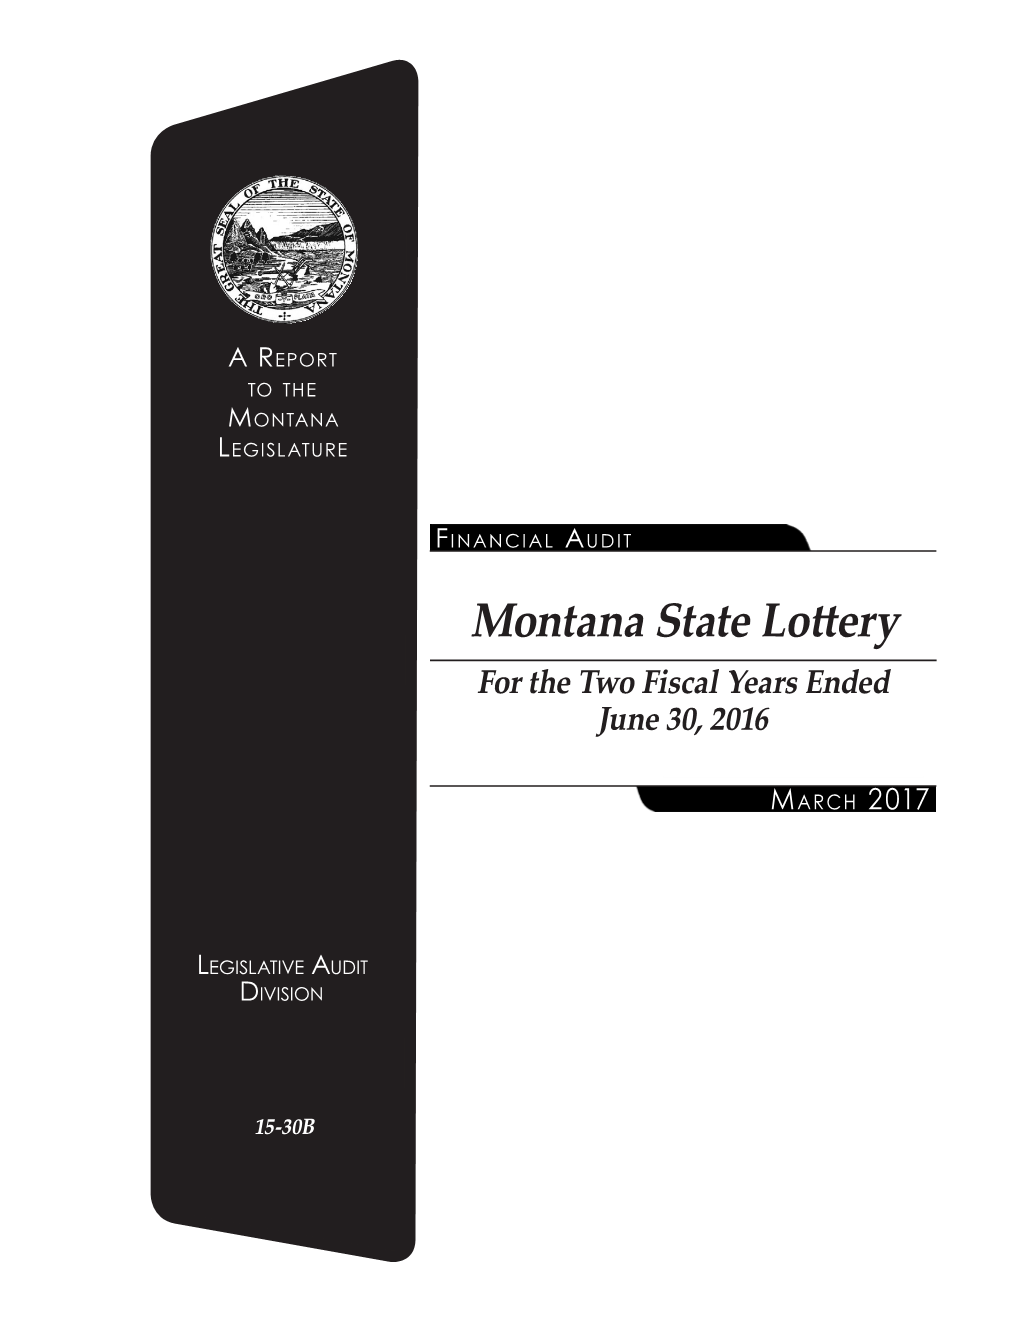 Montana State Lottery for the Two Fiscal Years Ended June 30, 2016